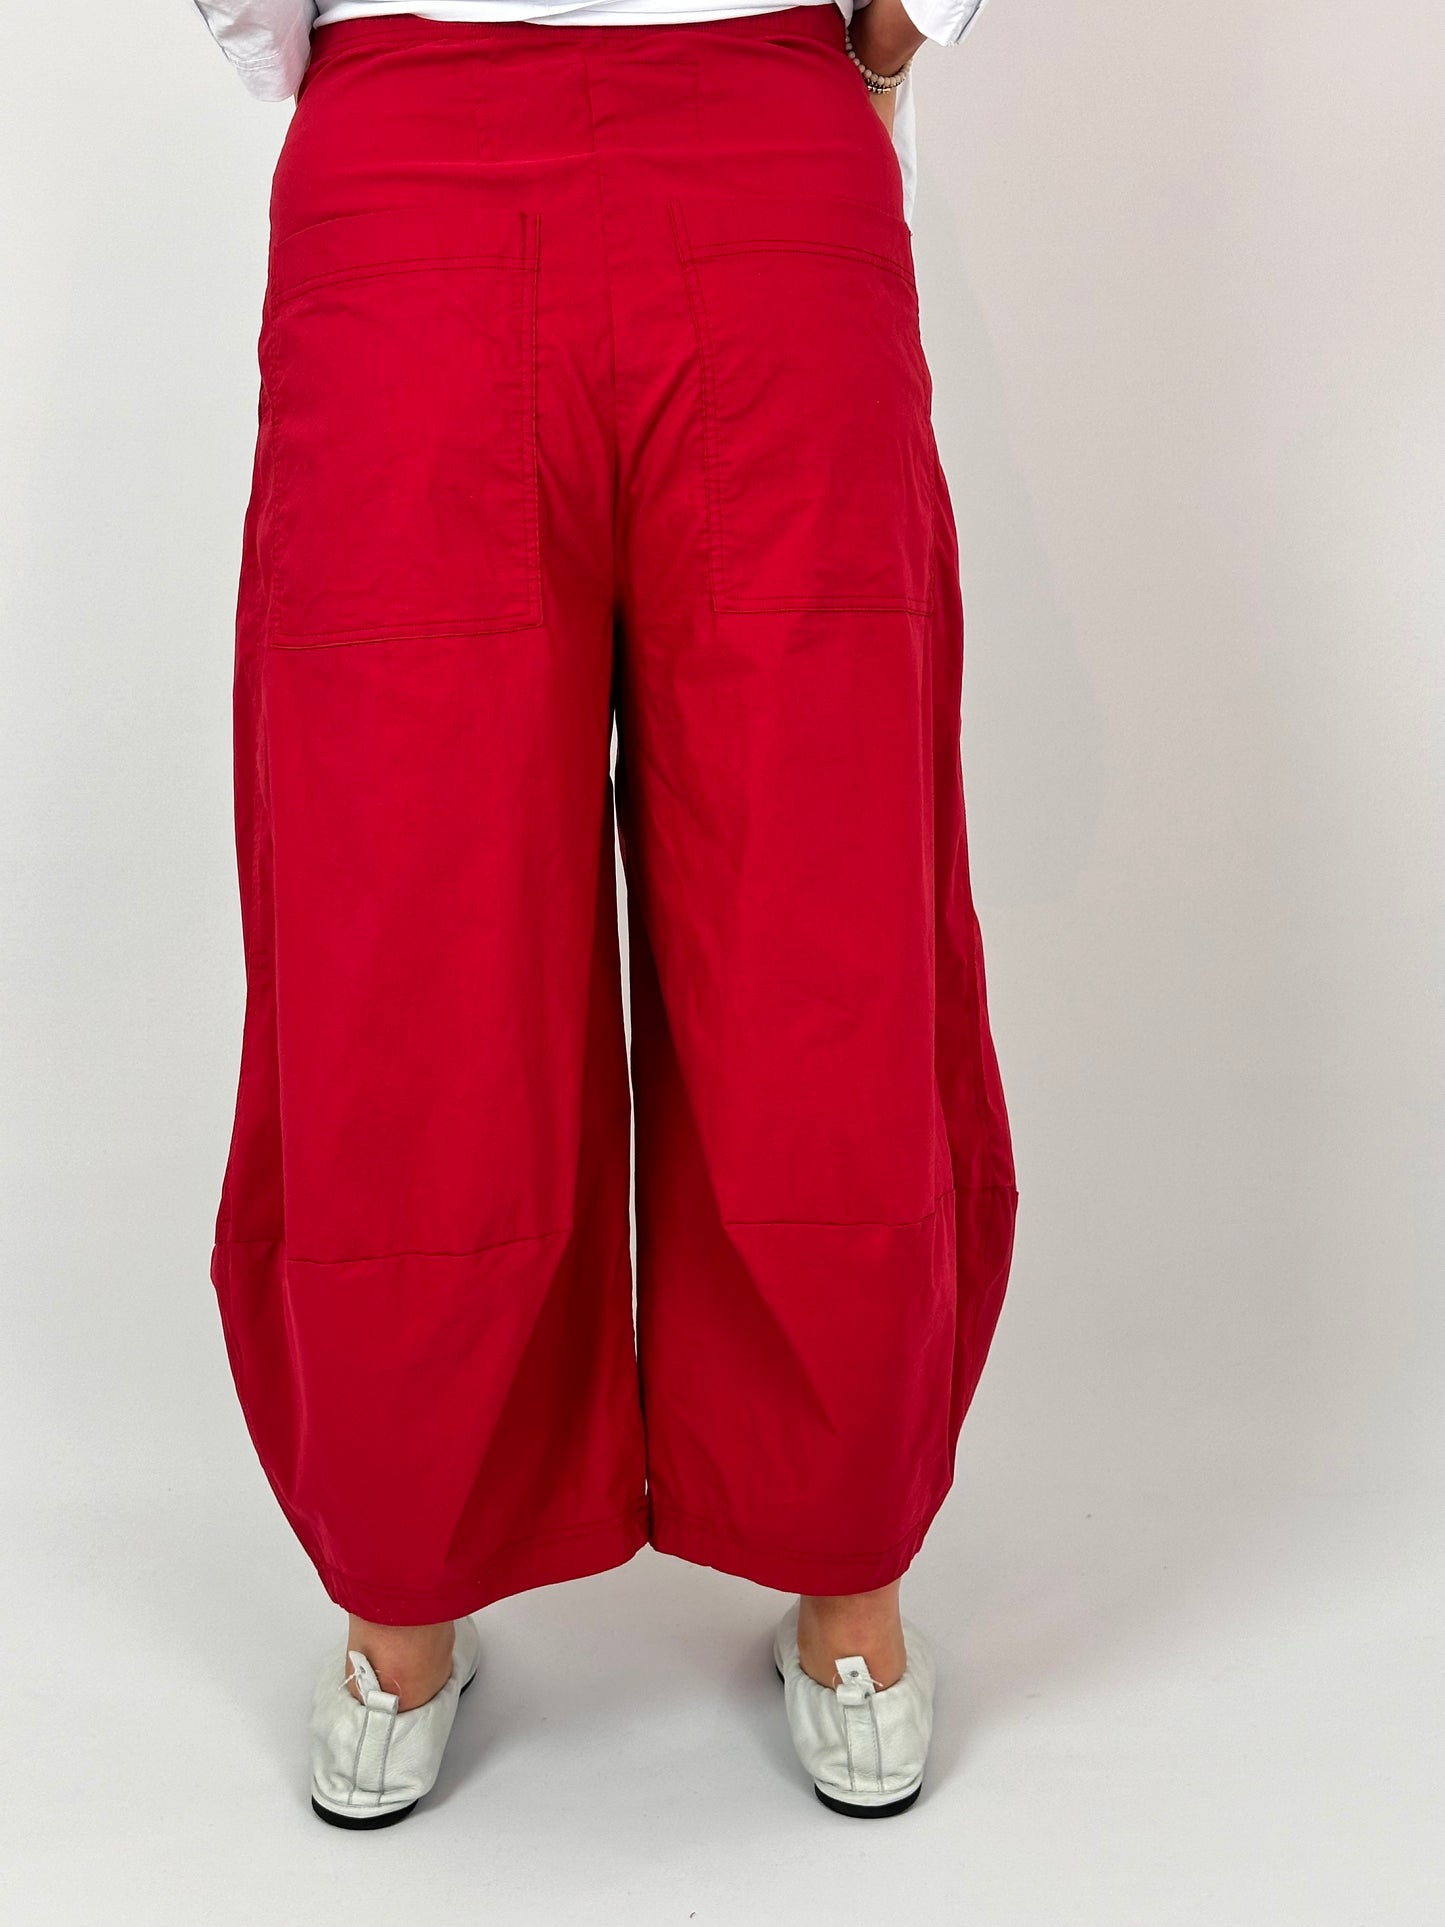 RBL 3630107 Trousers Chilli